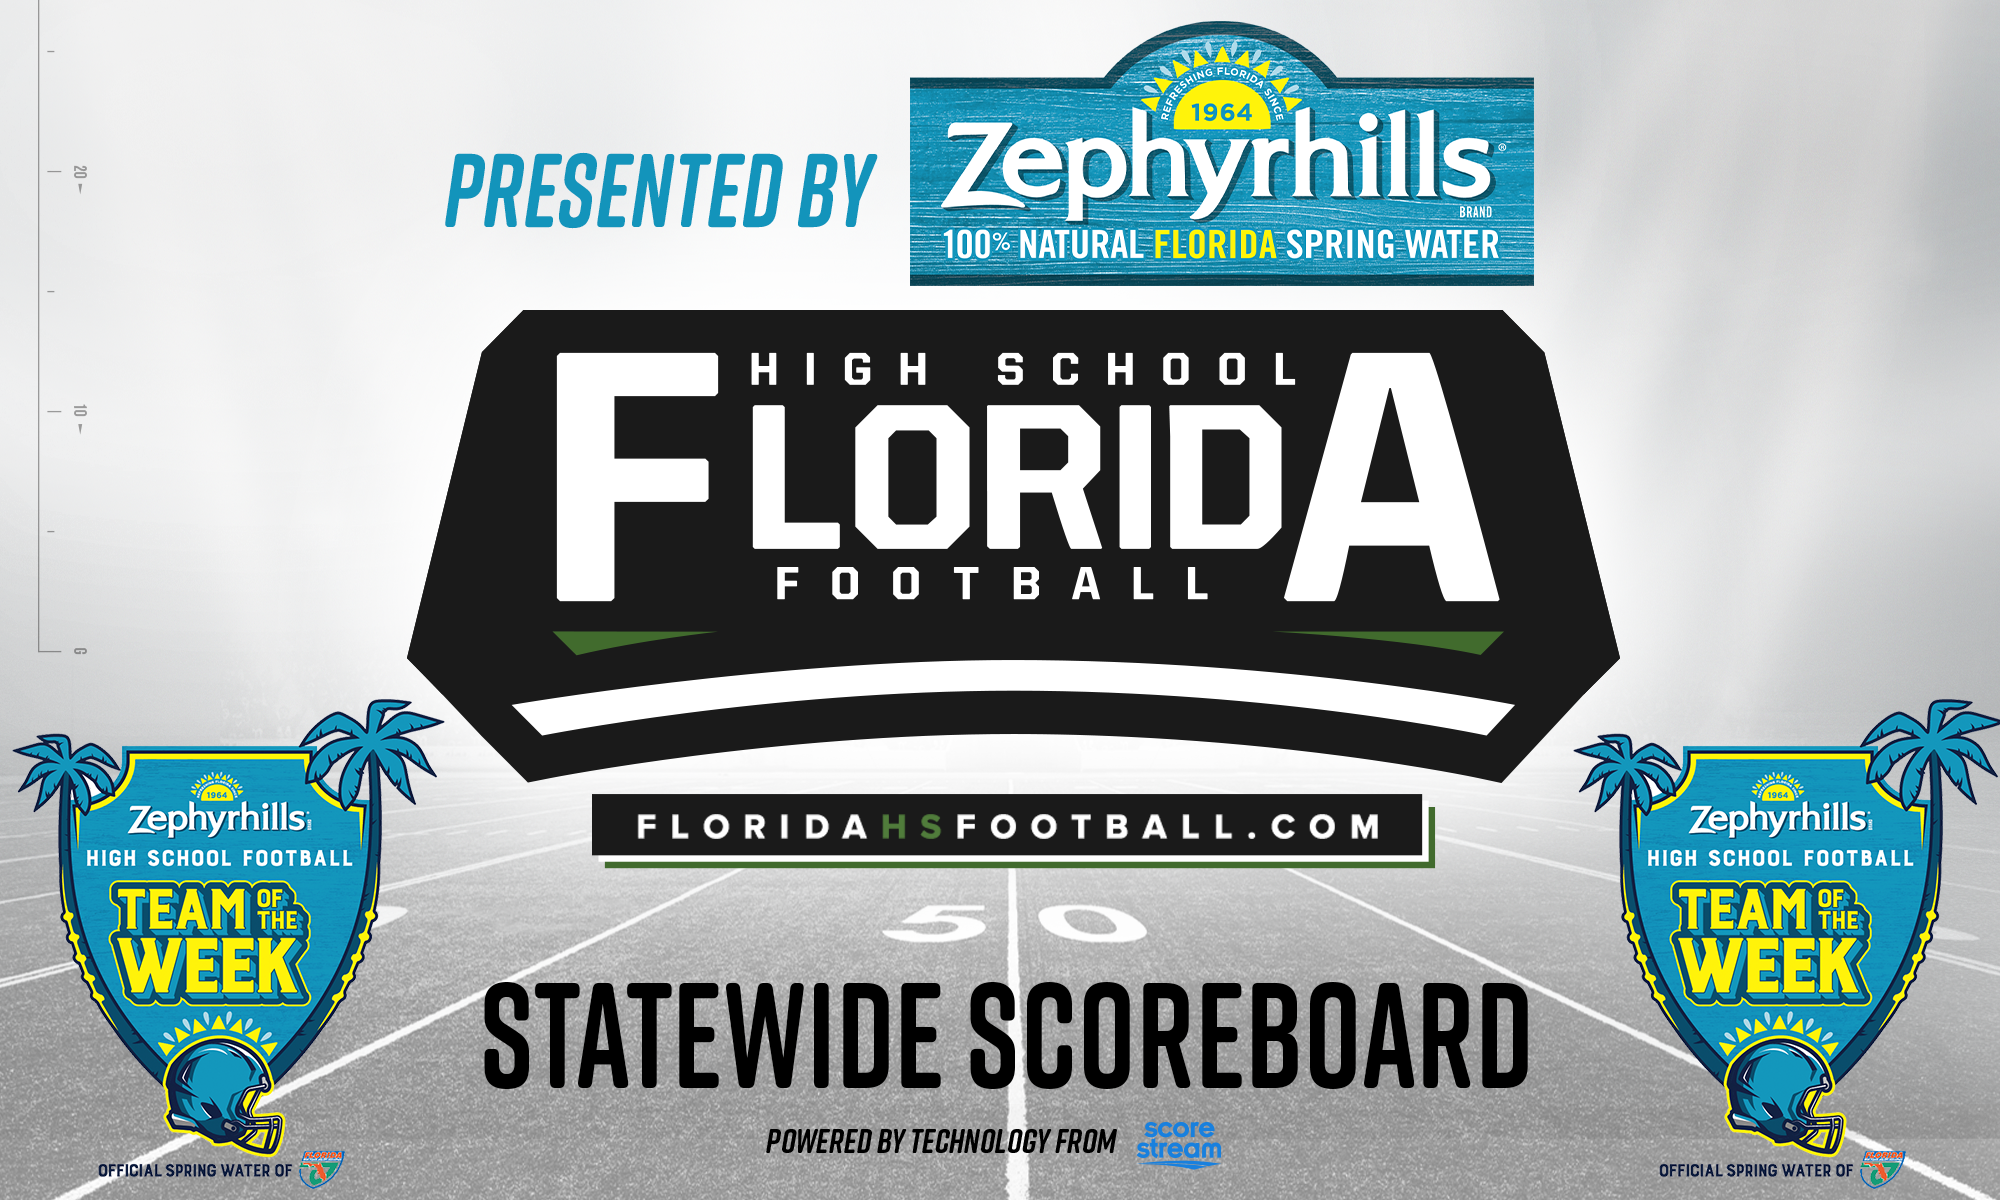 Upcoming FHSAA Events and Schedules